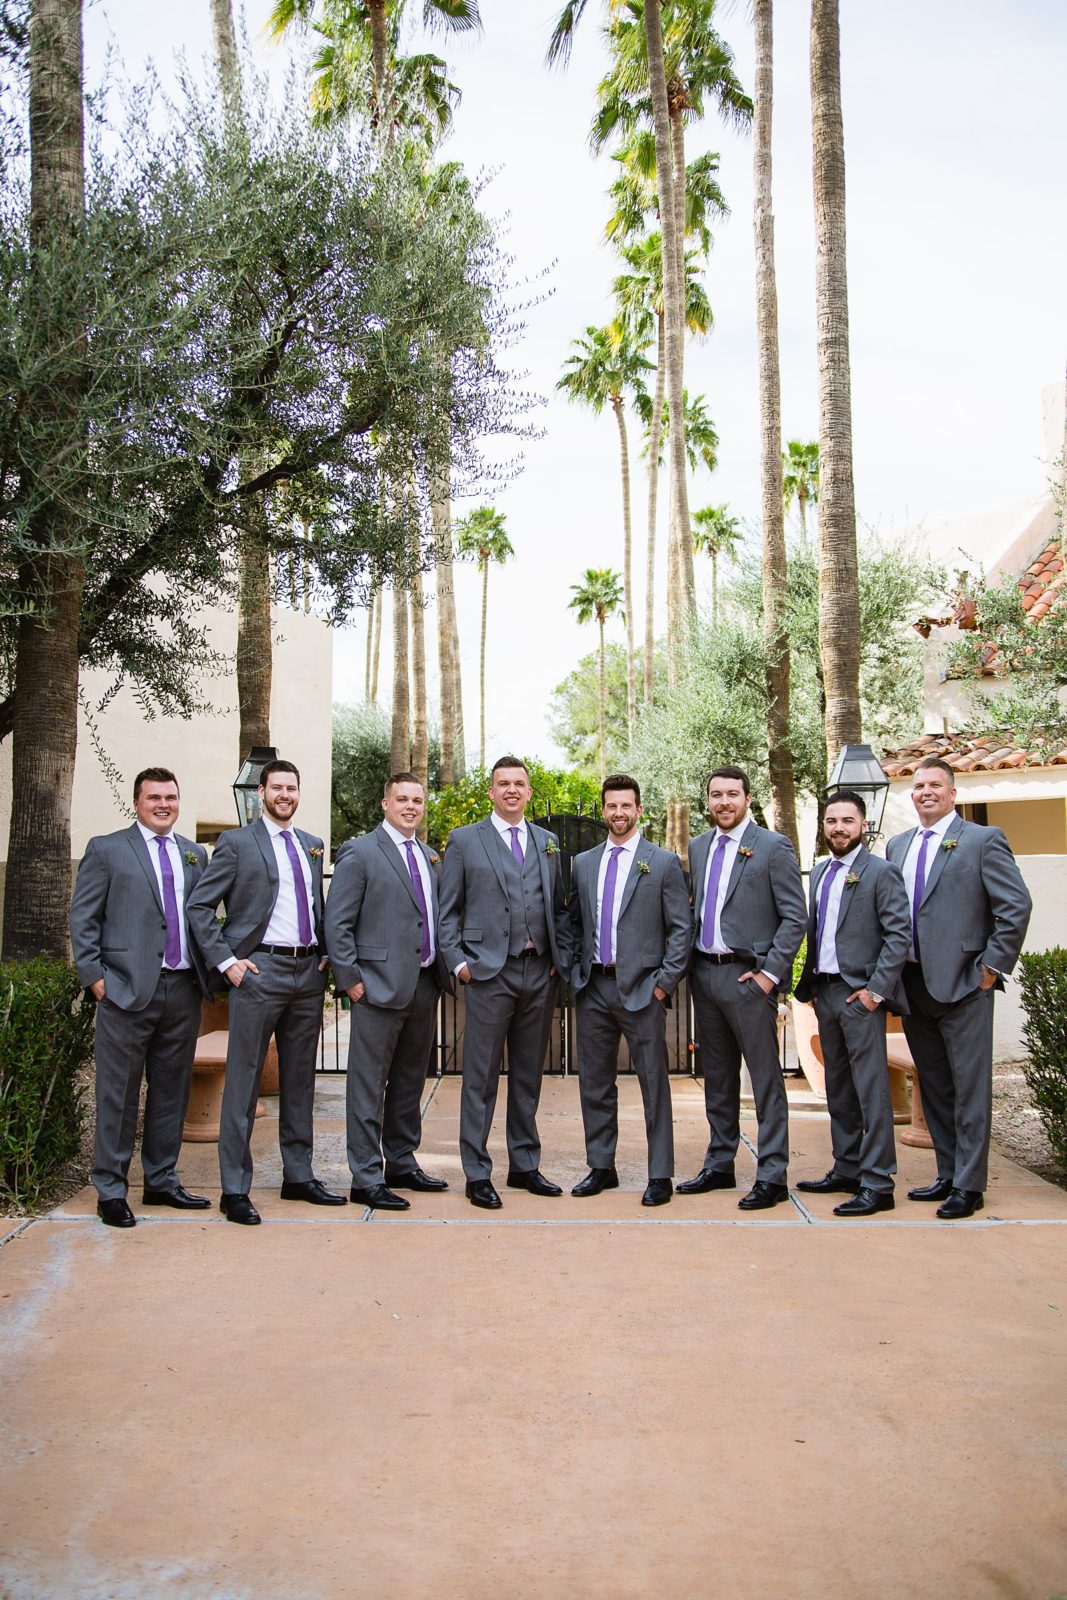 Groom and groomsmen together at a The Scottsdale Resort at McCormick Ranch wedding by Arizona wedding photographer PMA Photography.